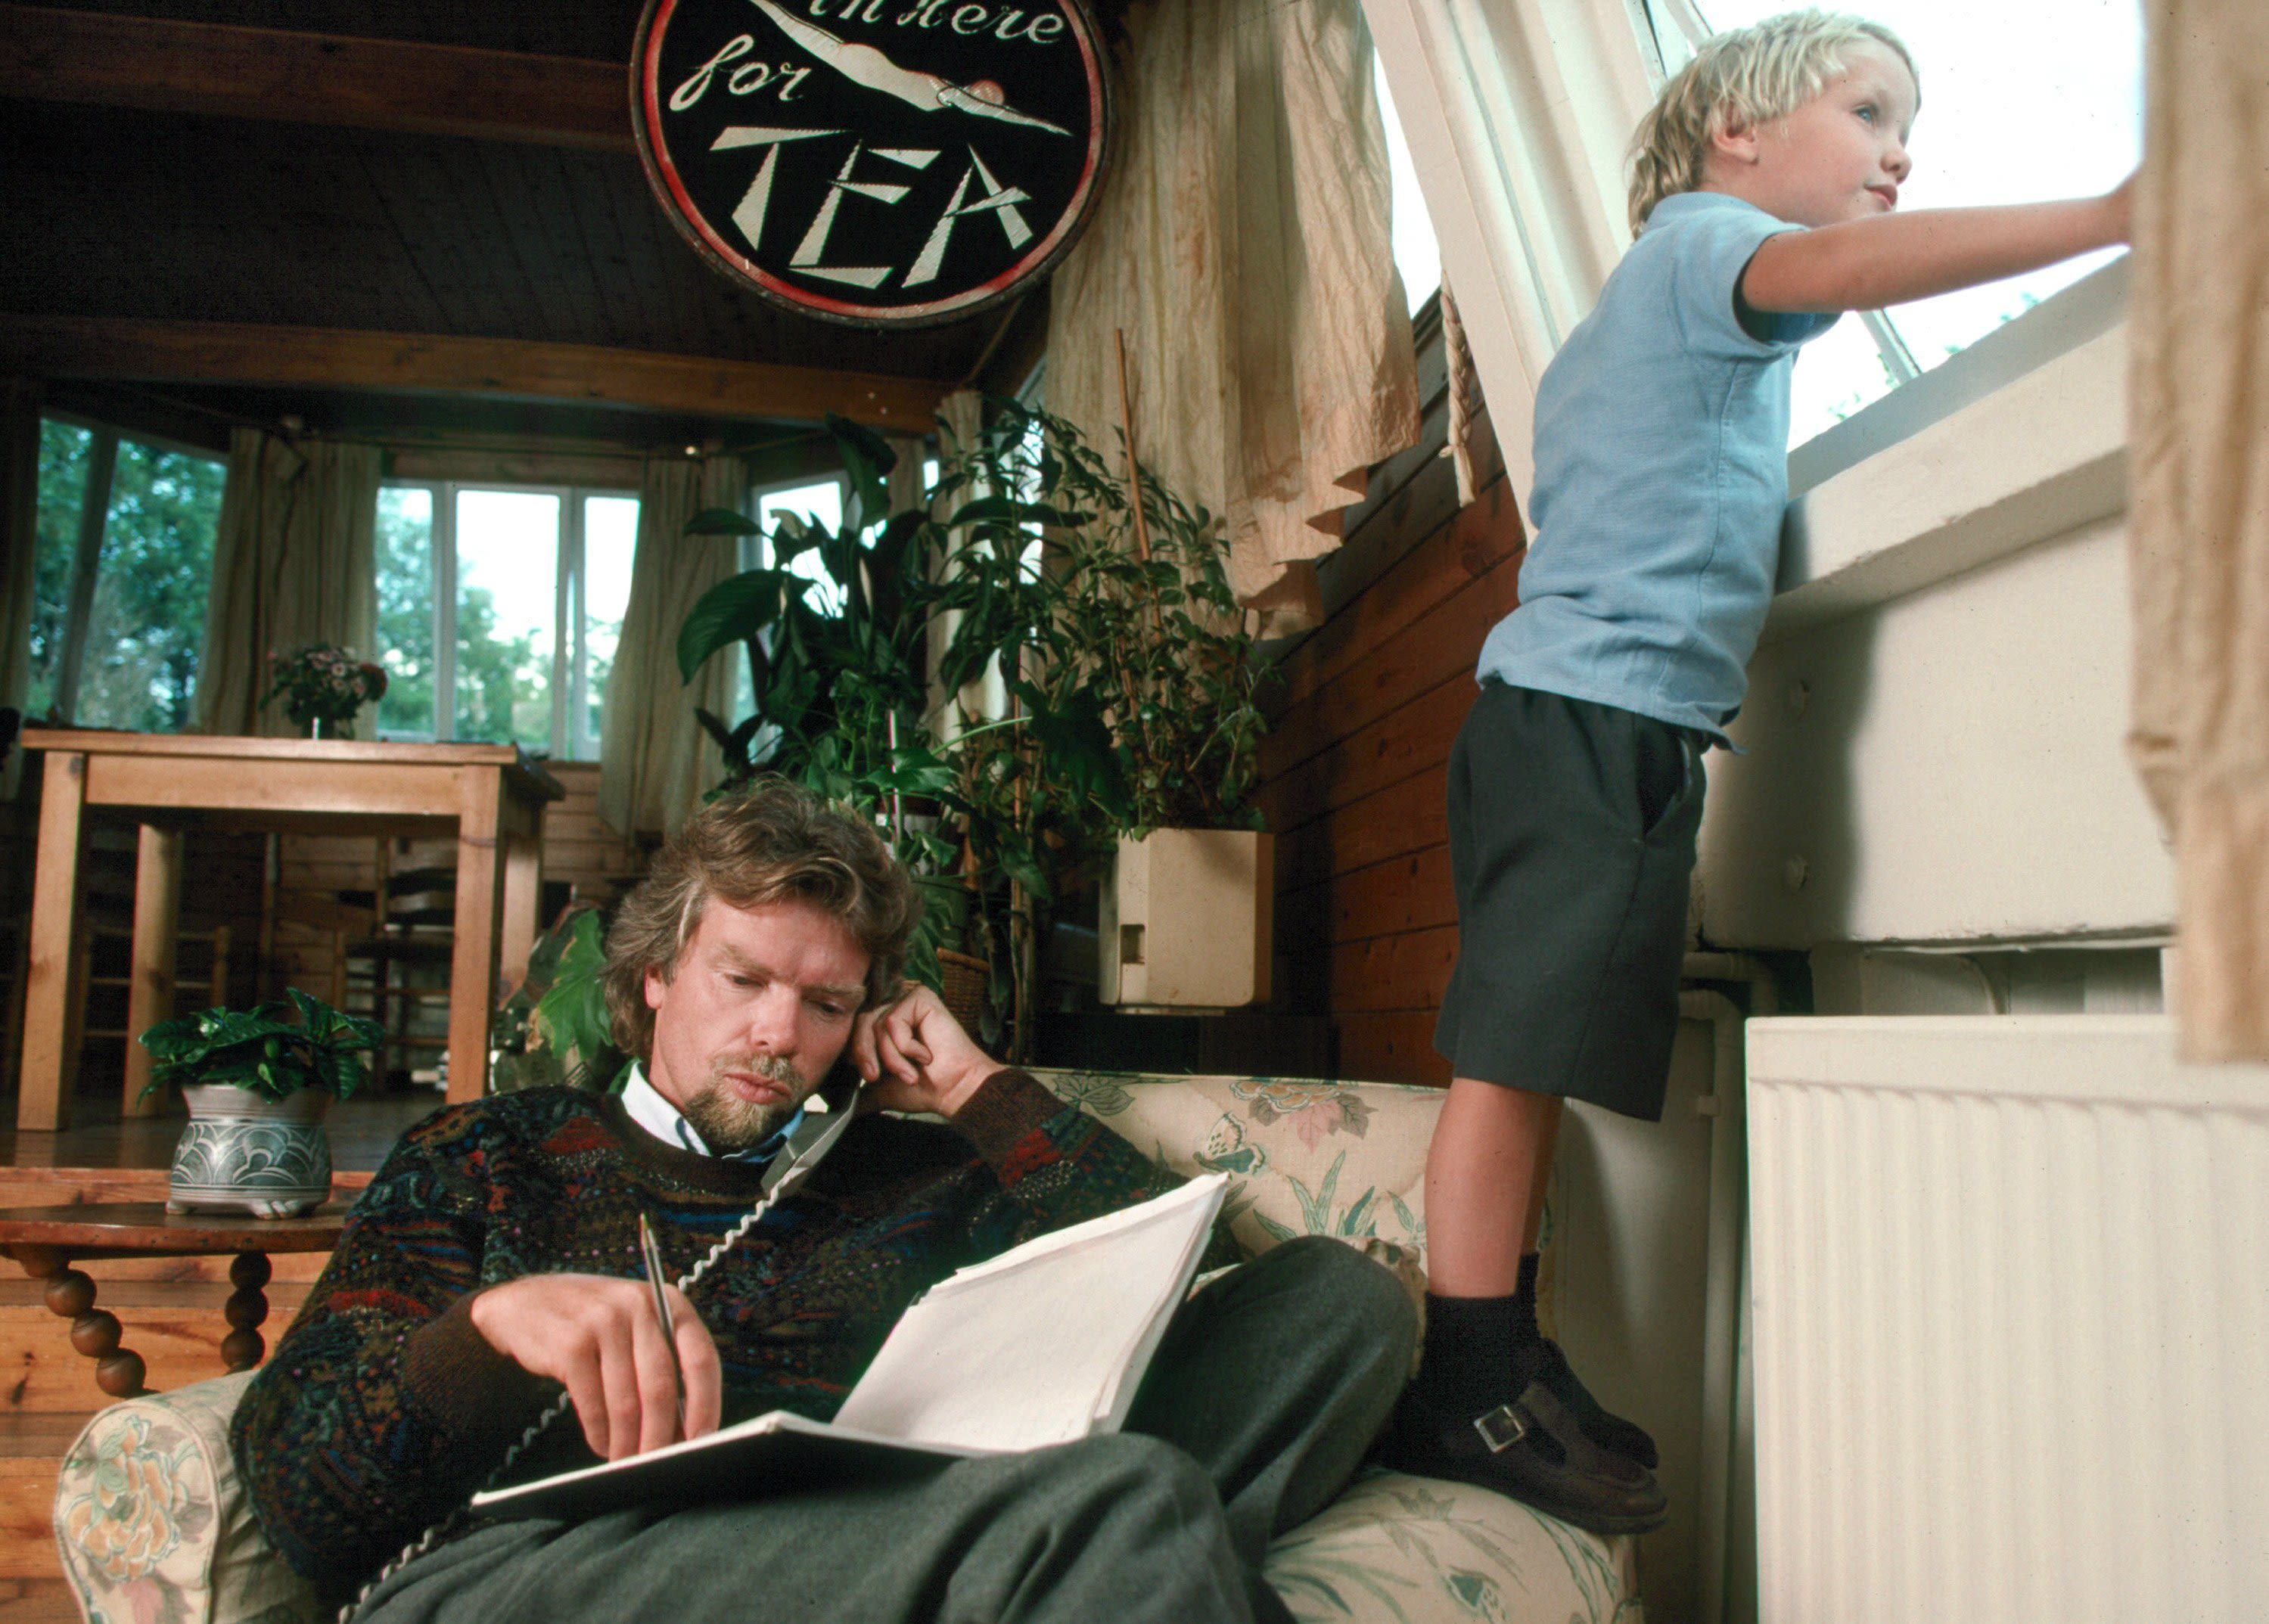 A young Richard Branson sitting down on the phone with his notebook with Sam Branson as a child standing on an armchair looking out the window